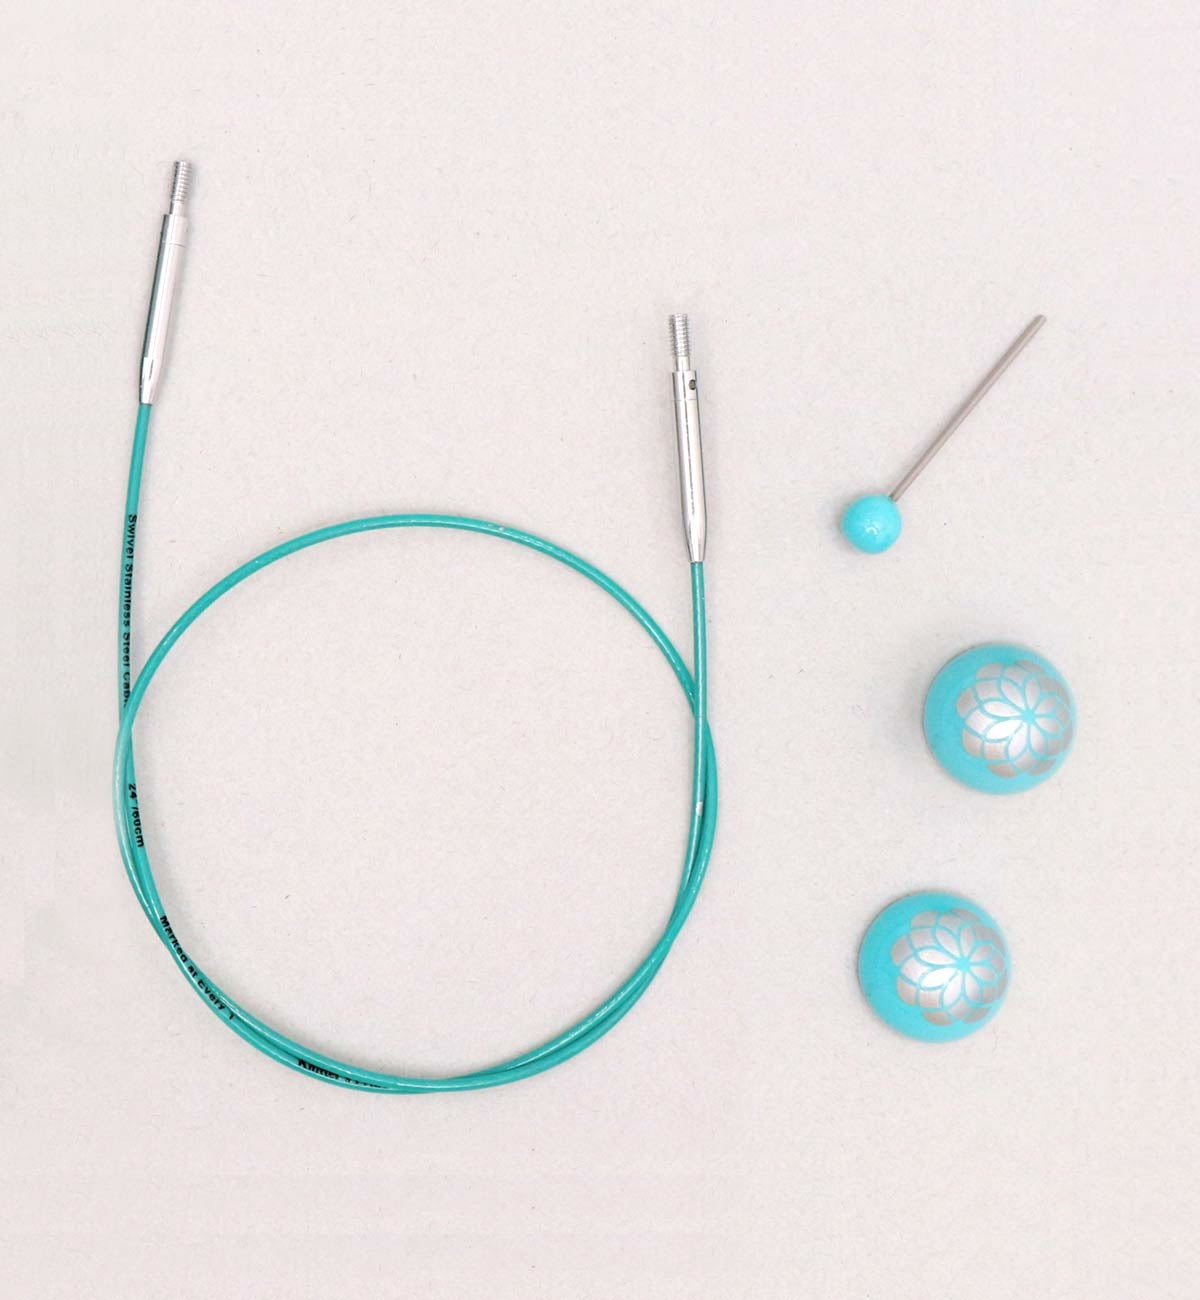 Knitter's Pride Mindful Collection Swivel Teal Cords